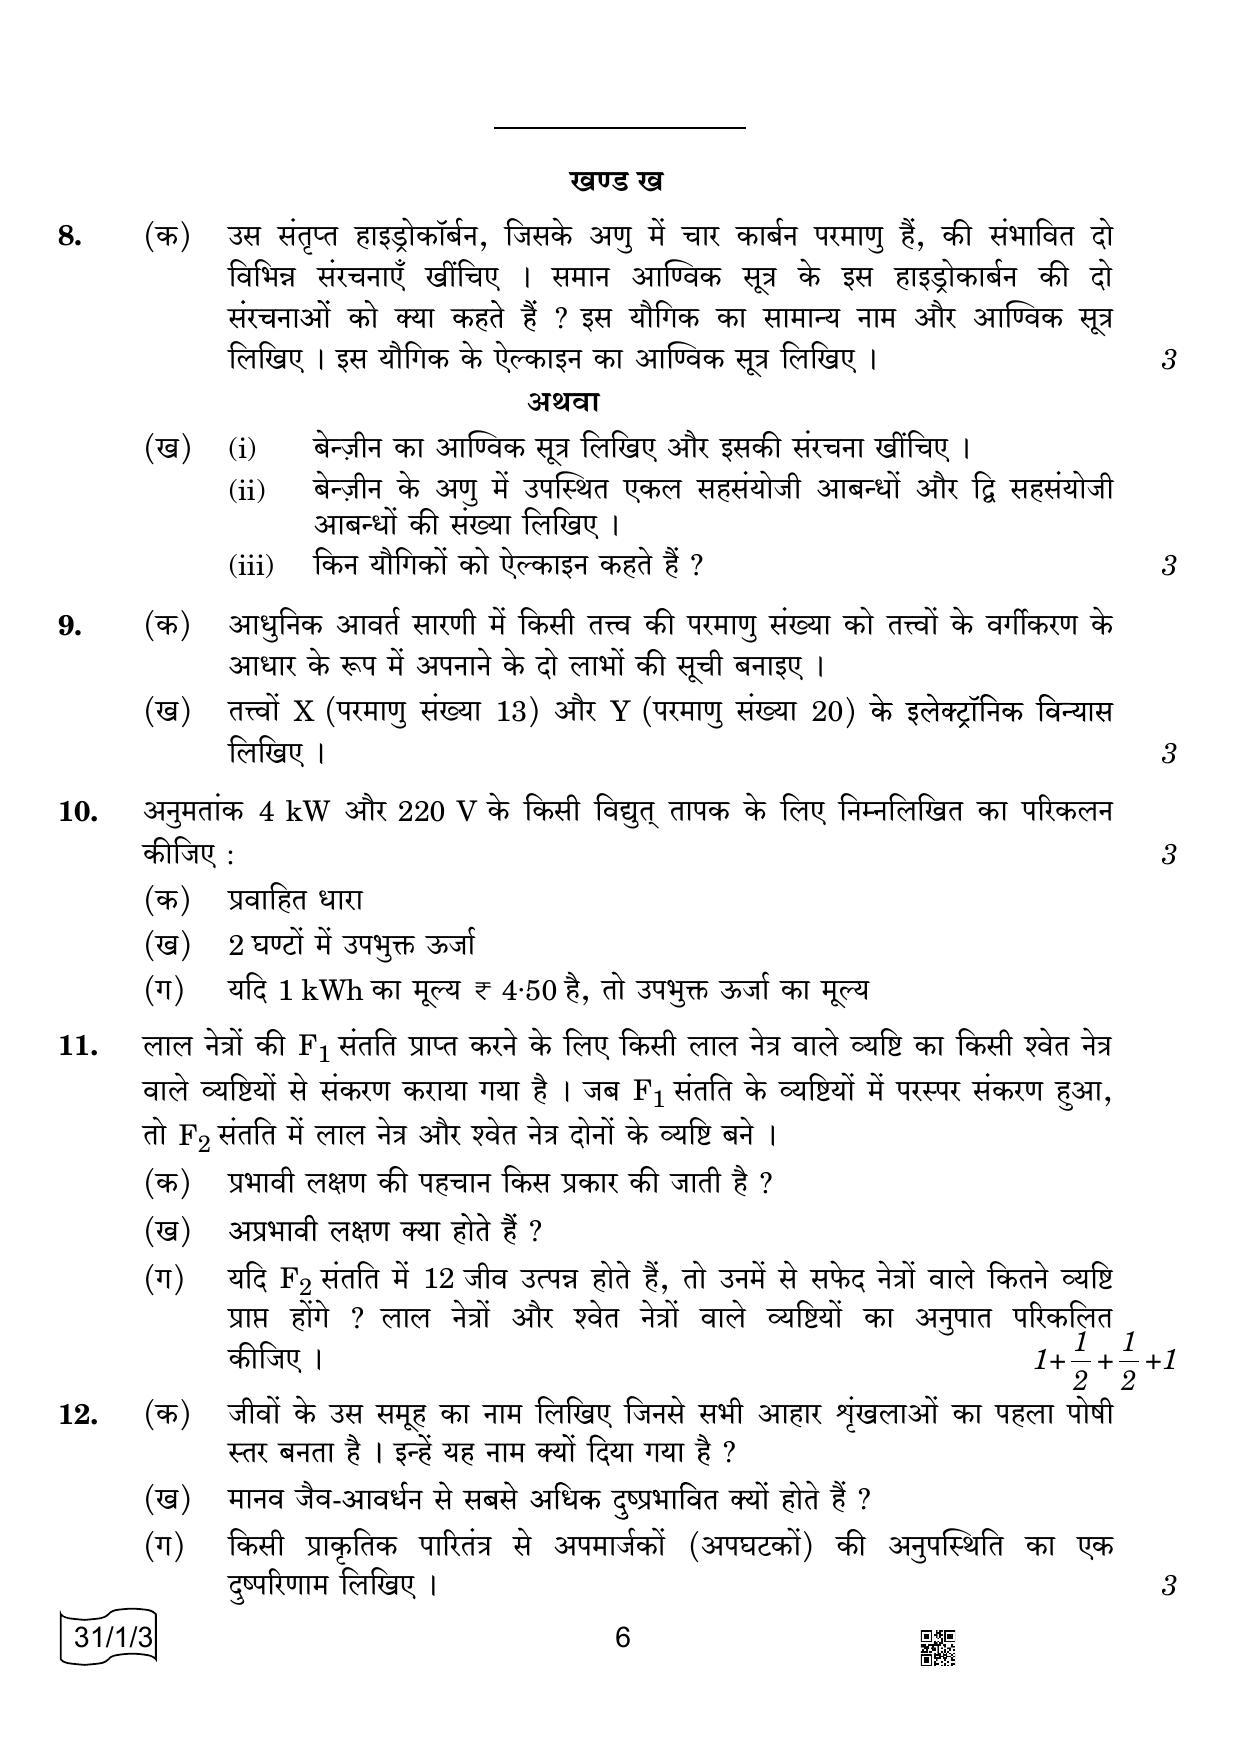 CBSE Class 10 31-1-3 Science 2022 Question Paper - Page 6